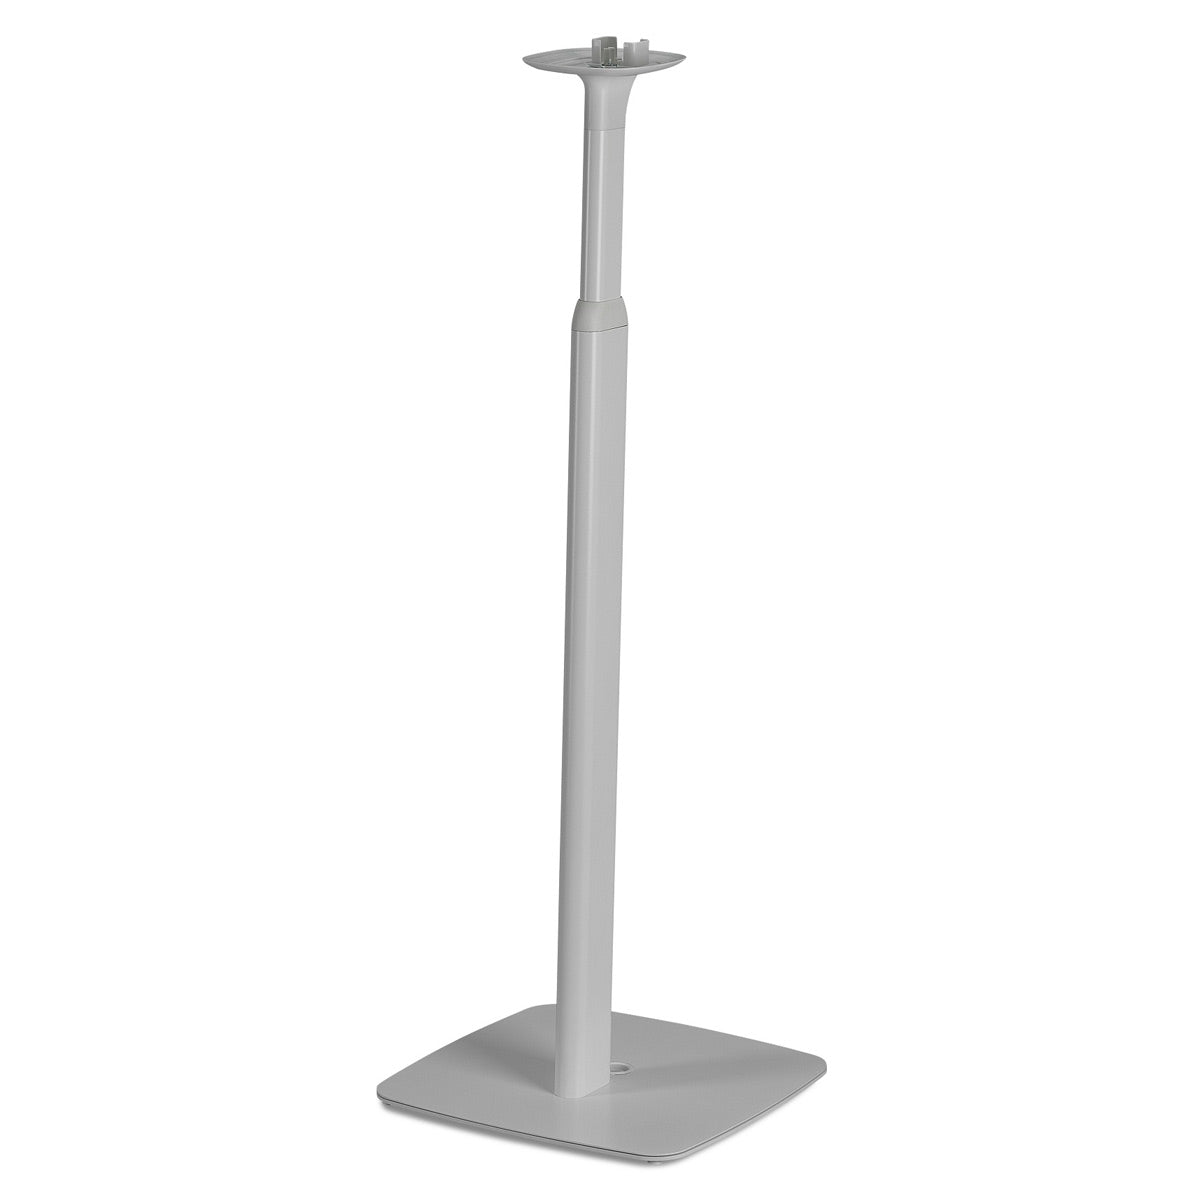 Flexson Height-Adjustable Floorstands for Sonos One or PLAY:1 - Pair (White)